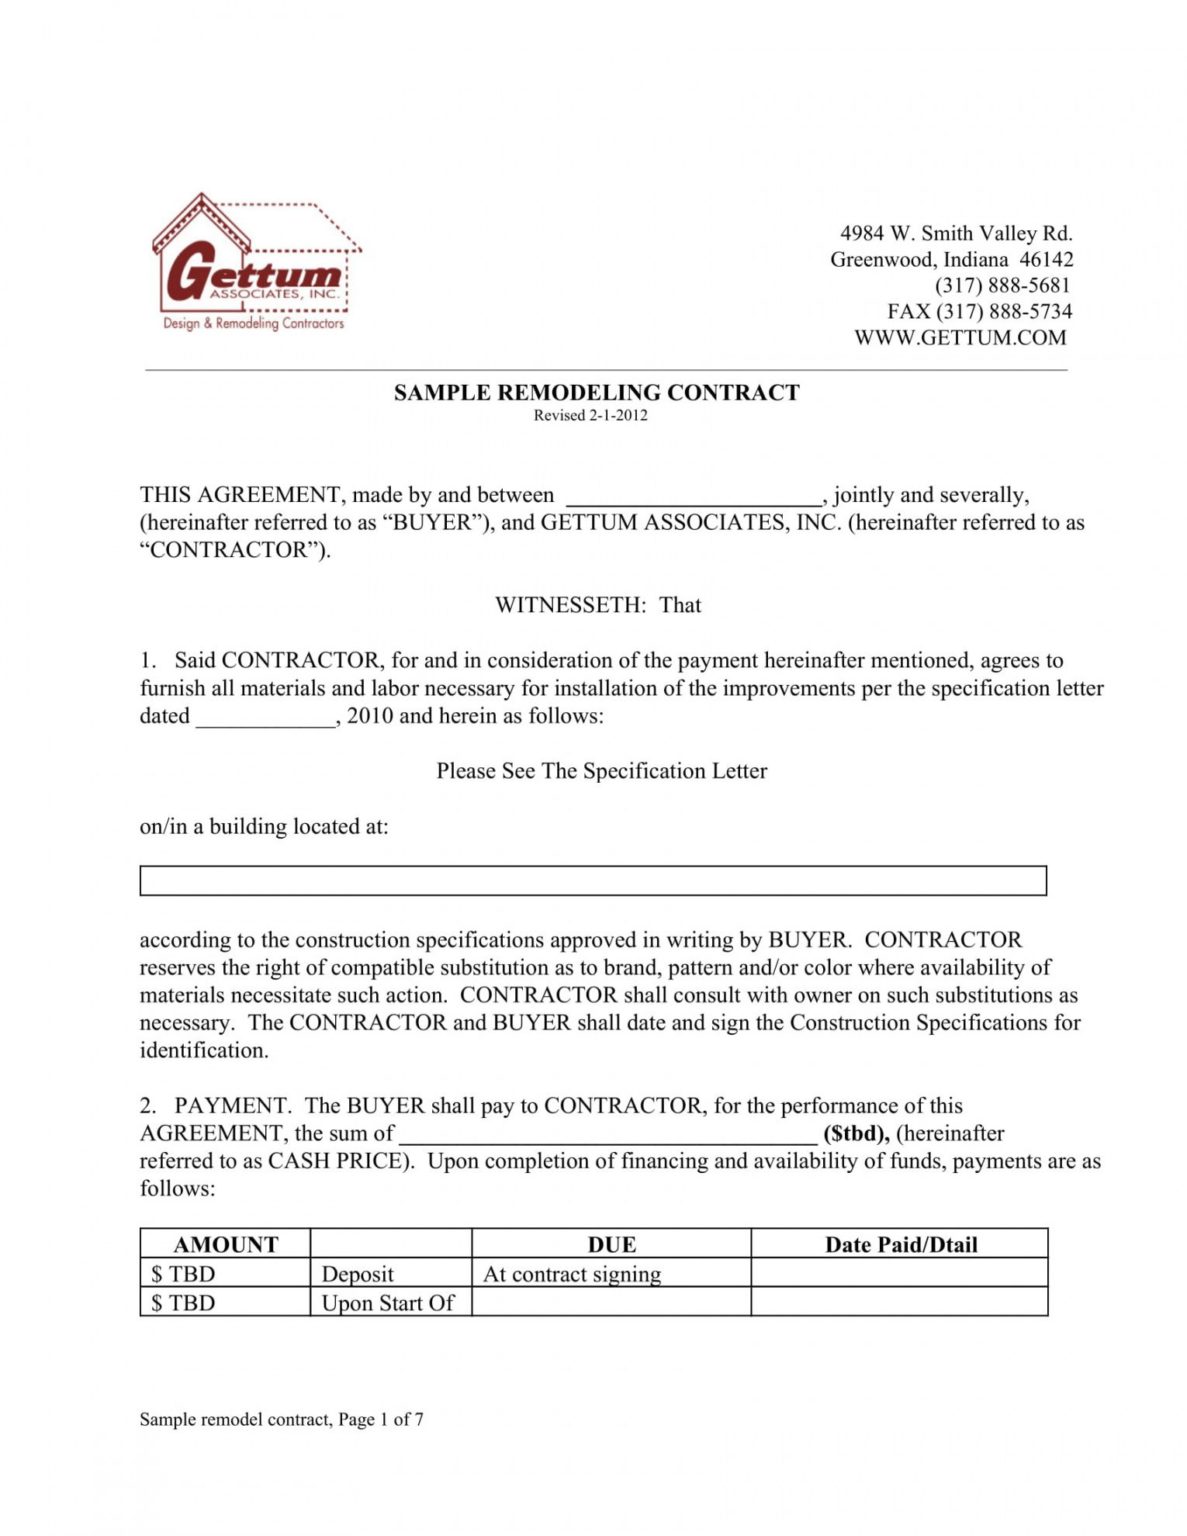 Home Remodeling Contract Template Pdf